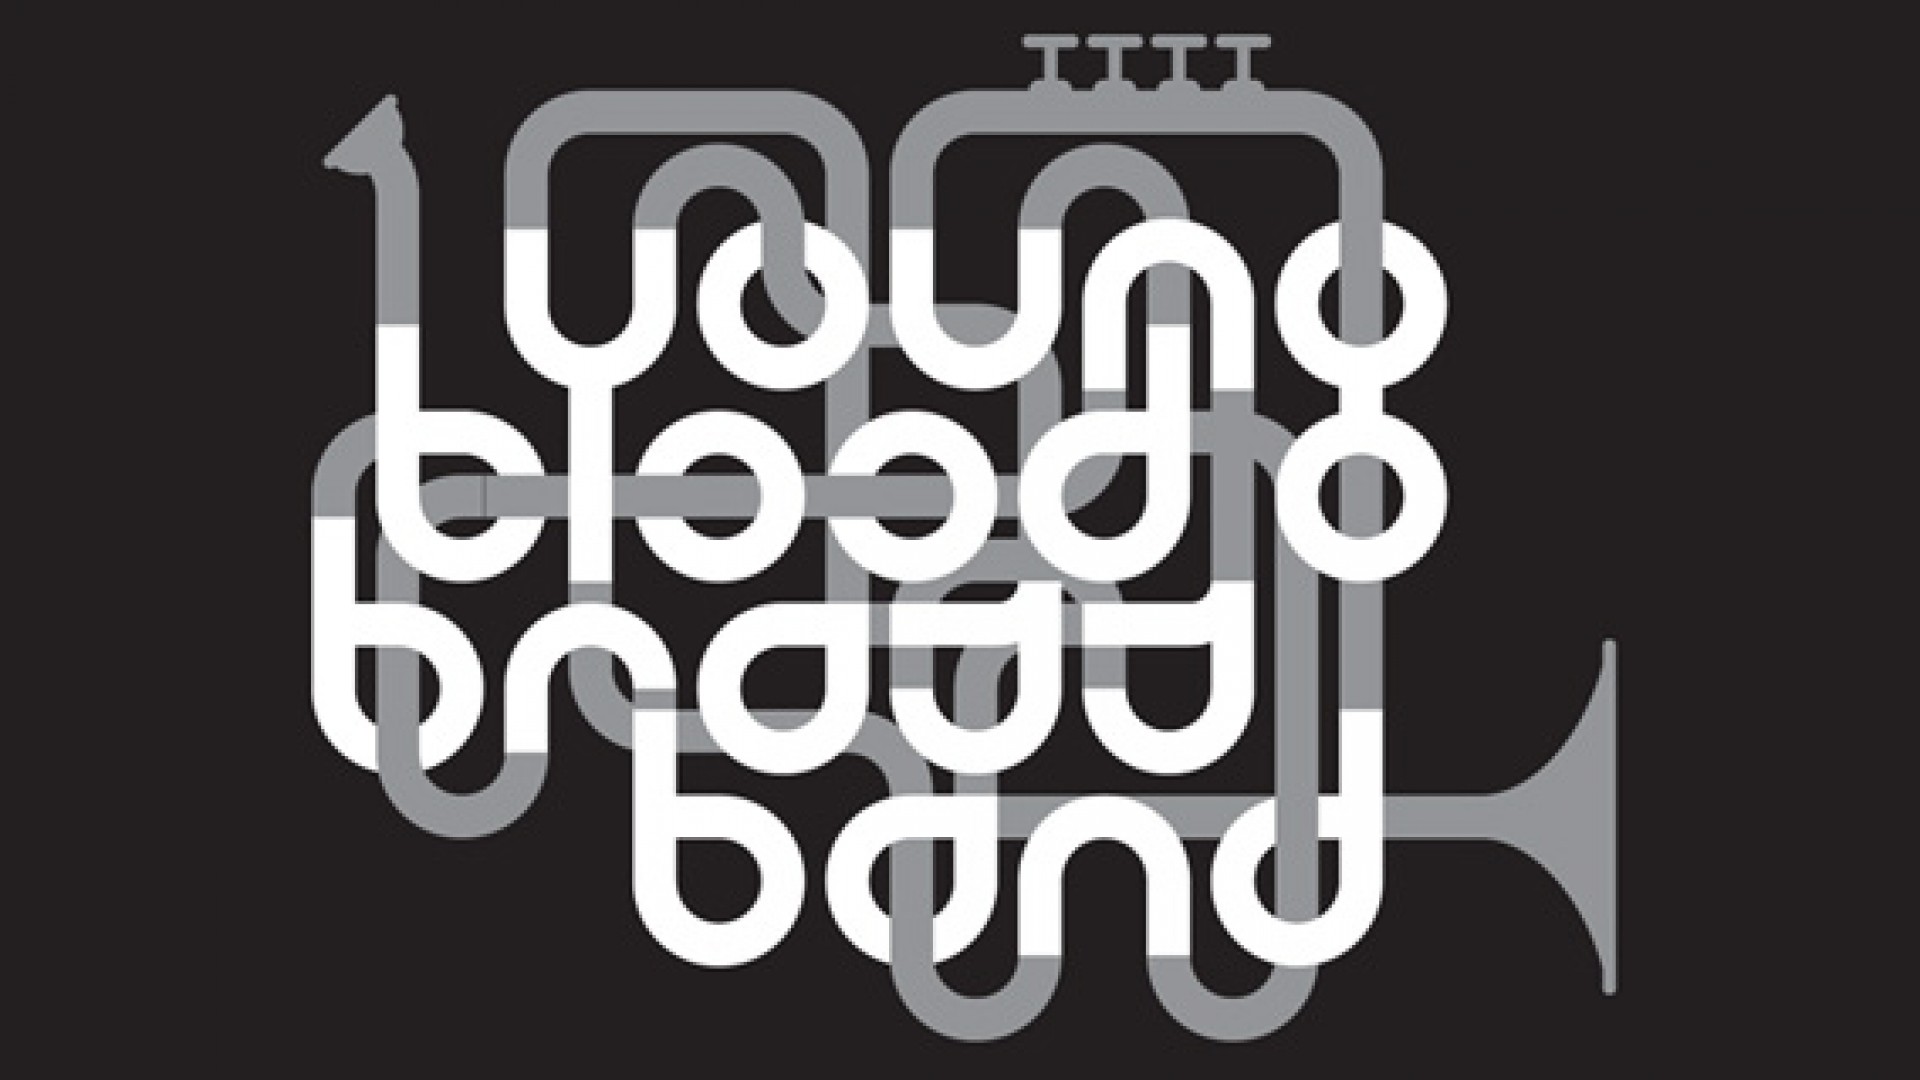 Youngblood Brass Band